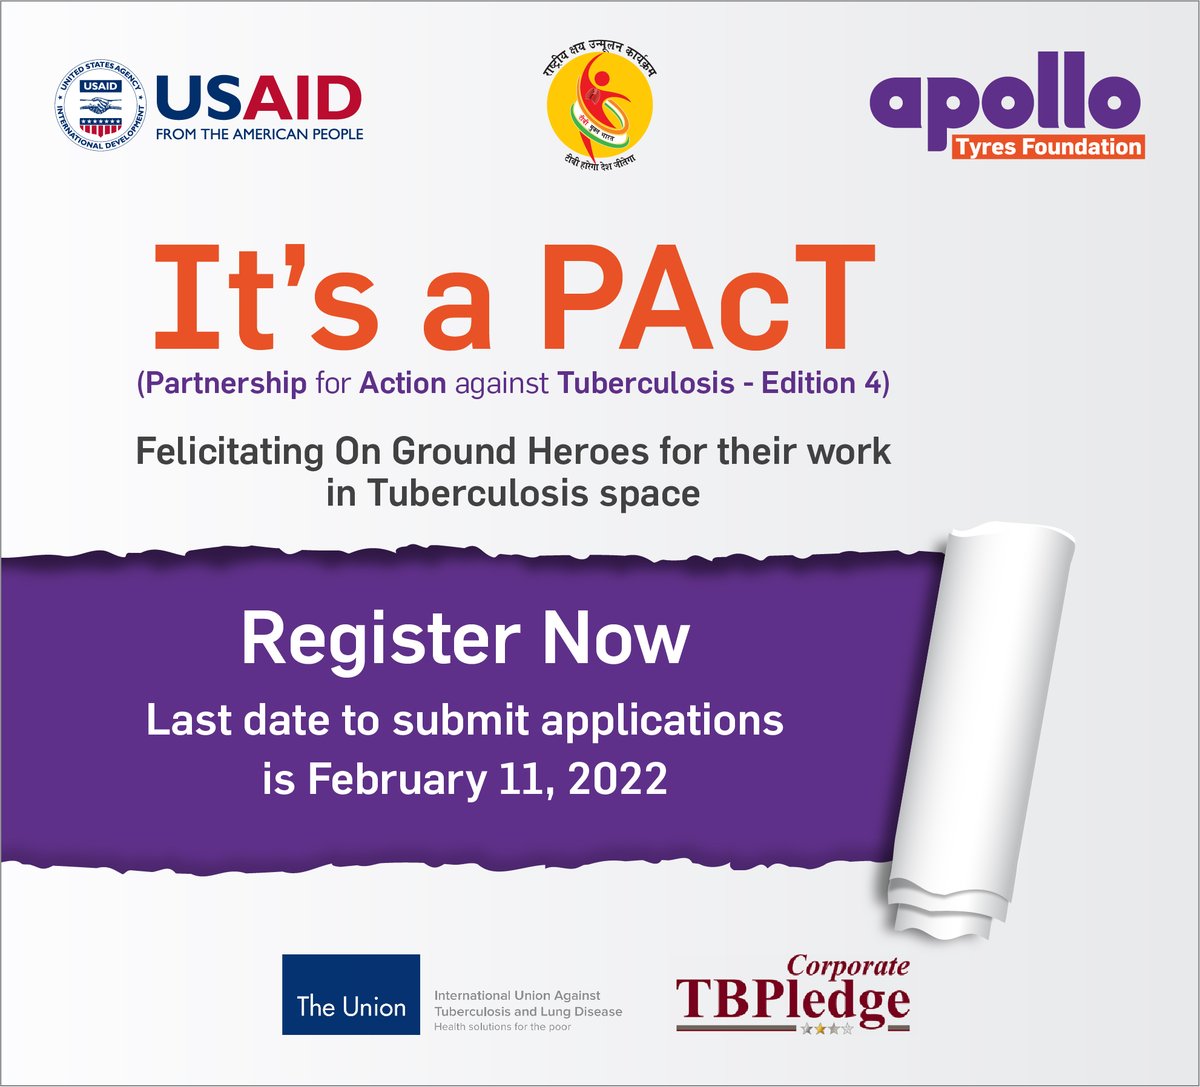 Inviting entries from credible NGOs involved in the fight against TB. Our Corporate TB pledge Diamond member @apollotyres intends to acknowledge & strengthen the contribution by NGOs & civil societies in TB space at PAcT edition 4!
Apply-corporatetbpledge.org/.../felicitati…
#CorporateTBPledge